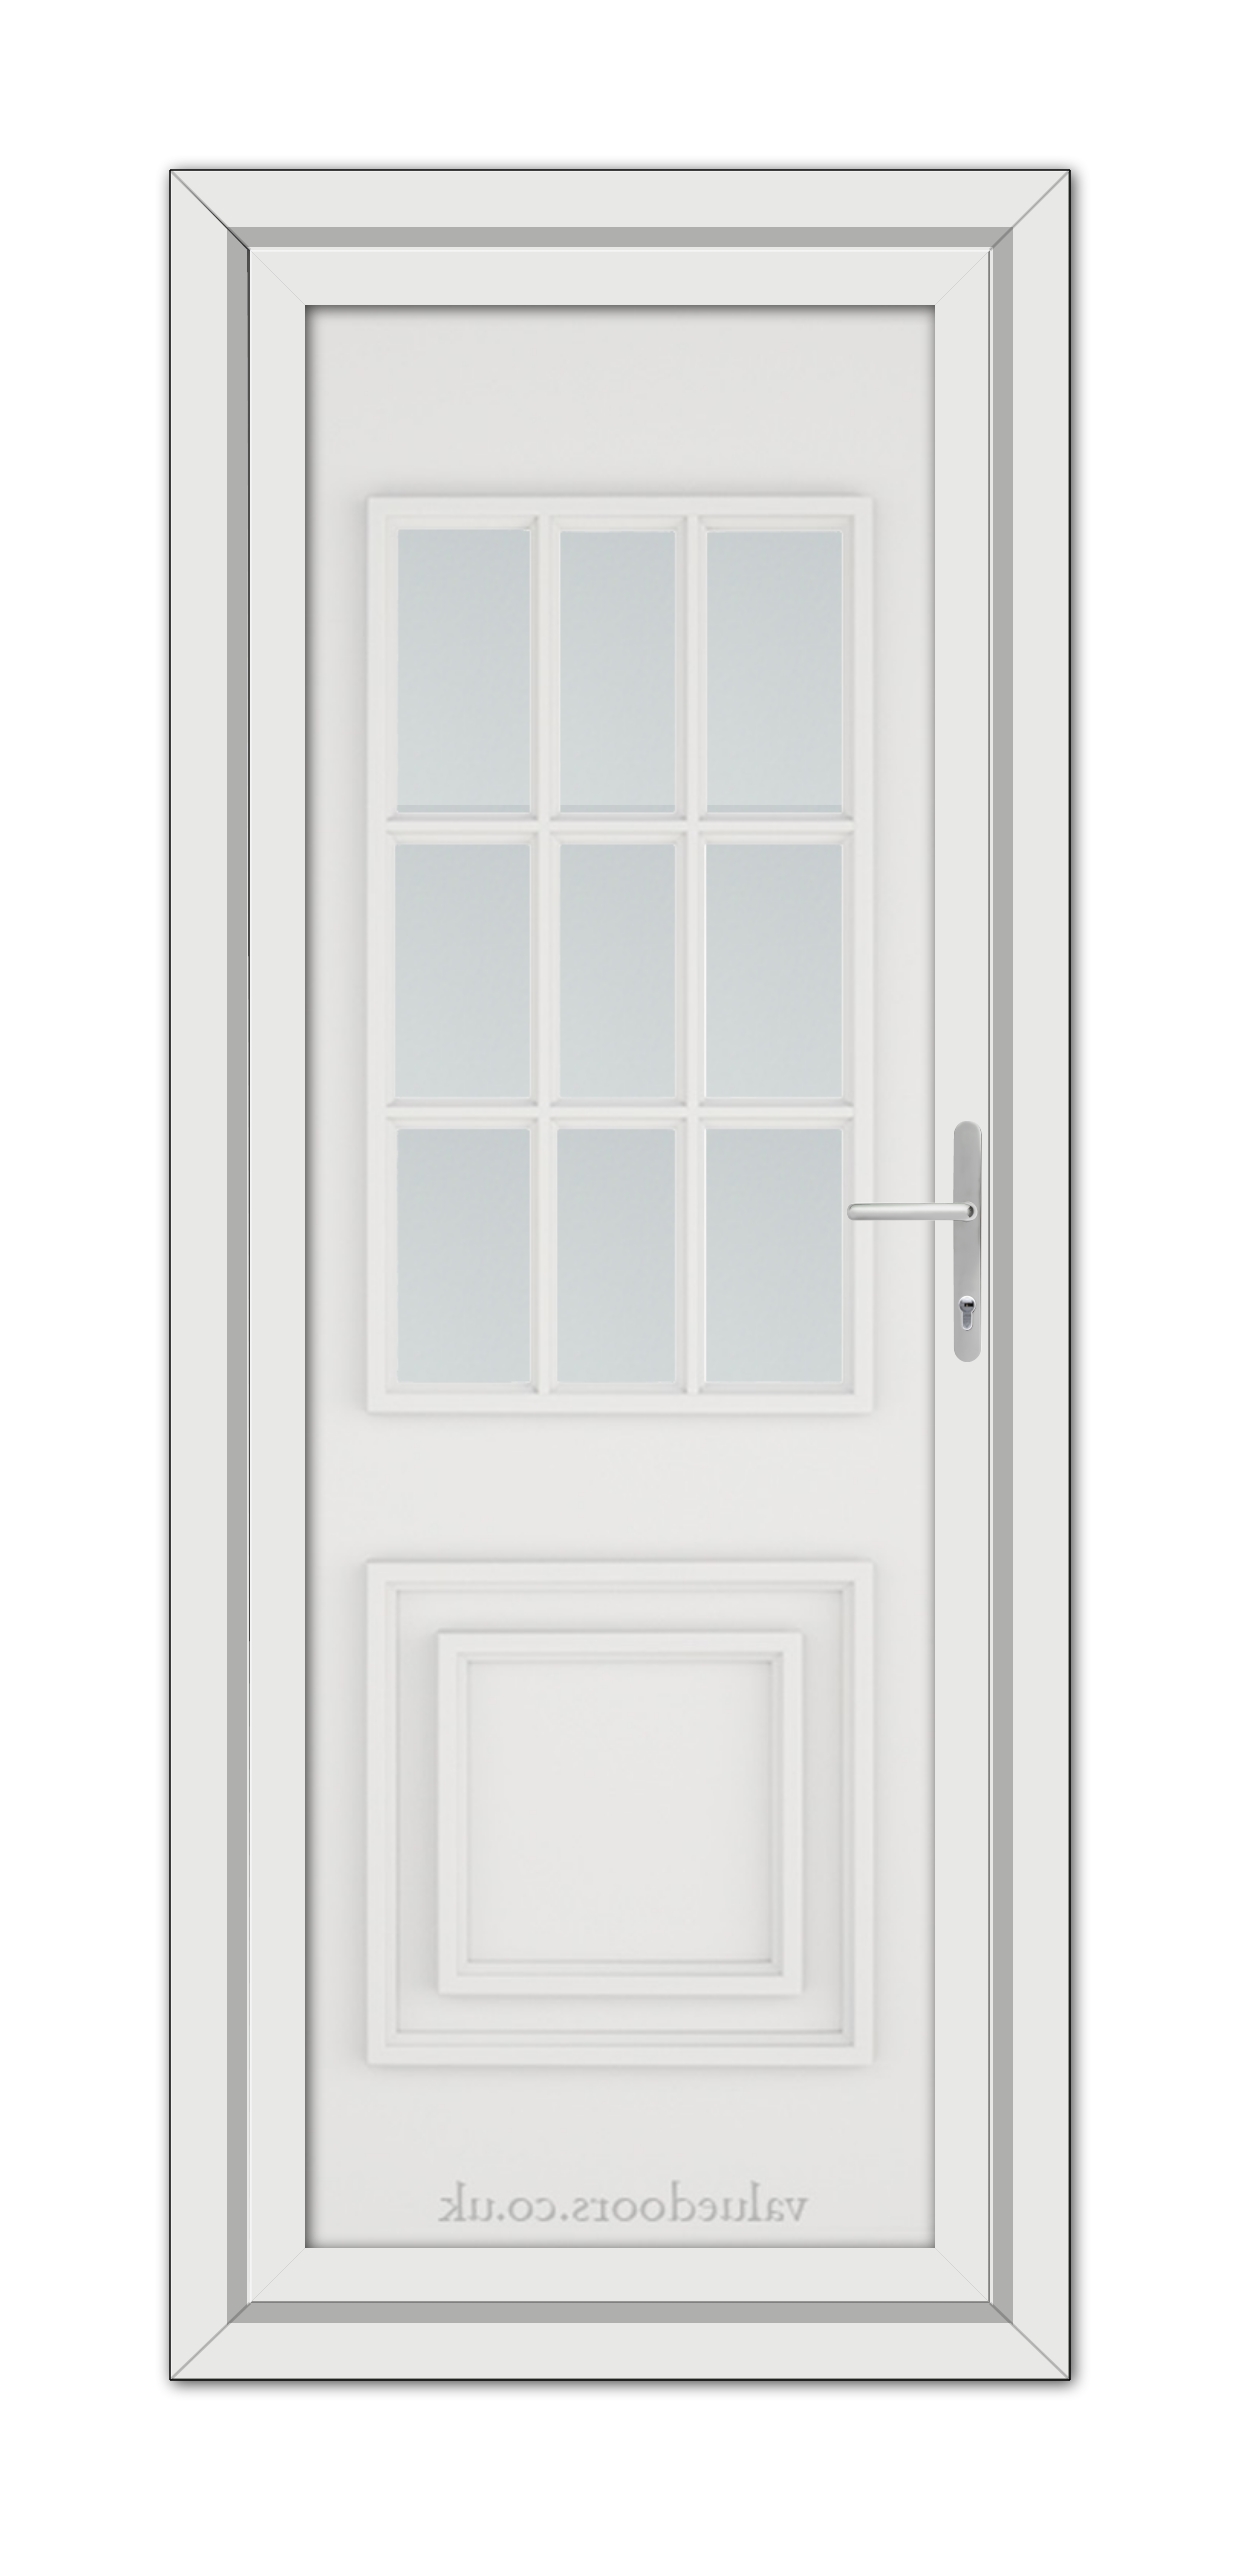 The White Cambridge One uPVC Door is a vertical rectangular door with a handled window, comprising nine frosted glass panes arranged in a 3x3 grid, and a lower decorative panel.